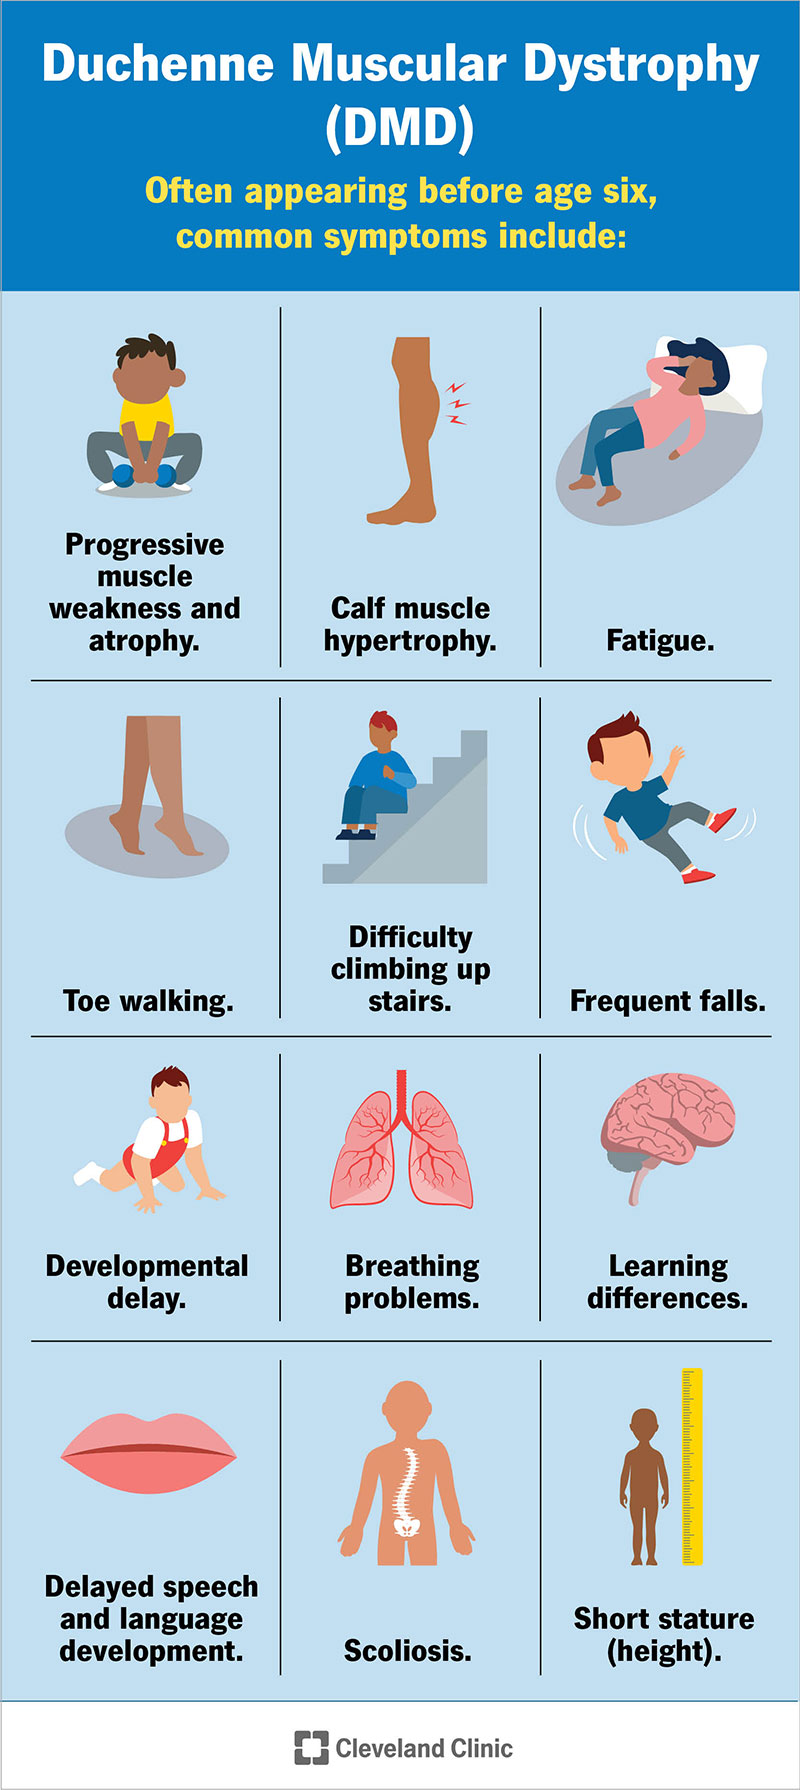 Symptoms of DMD often appear before age 6 and include fatigue, difficulty walking up stairs, frequent falls, developmental delay and more.